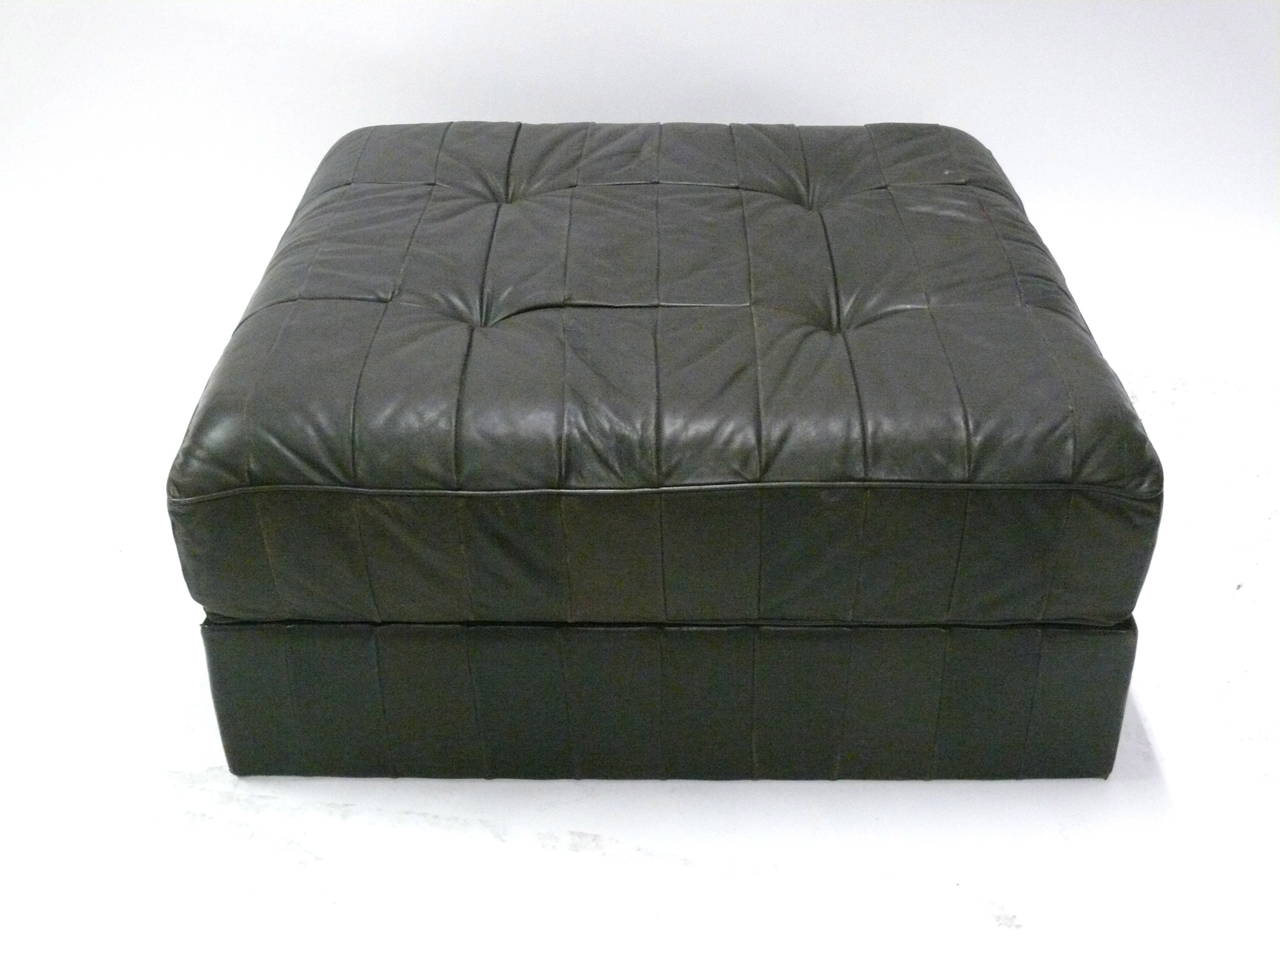 Massive patchwork ottoman by De Sede. Original dark brown and black leather with nice patina and coloring. Good original condition with some minor signs of wear and tear.